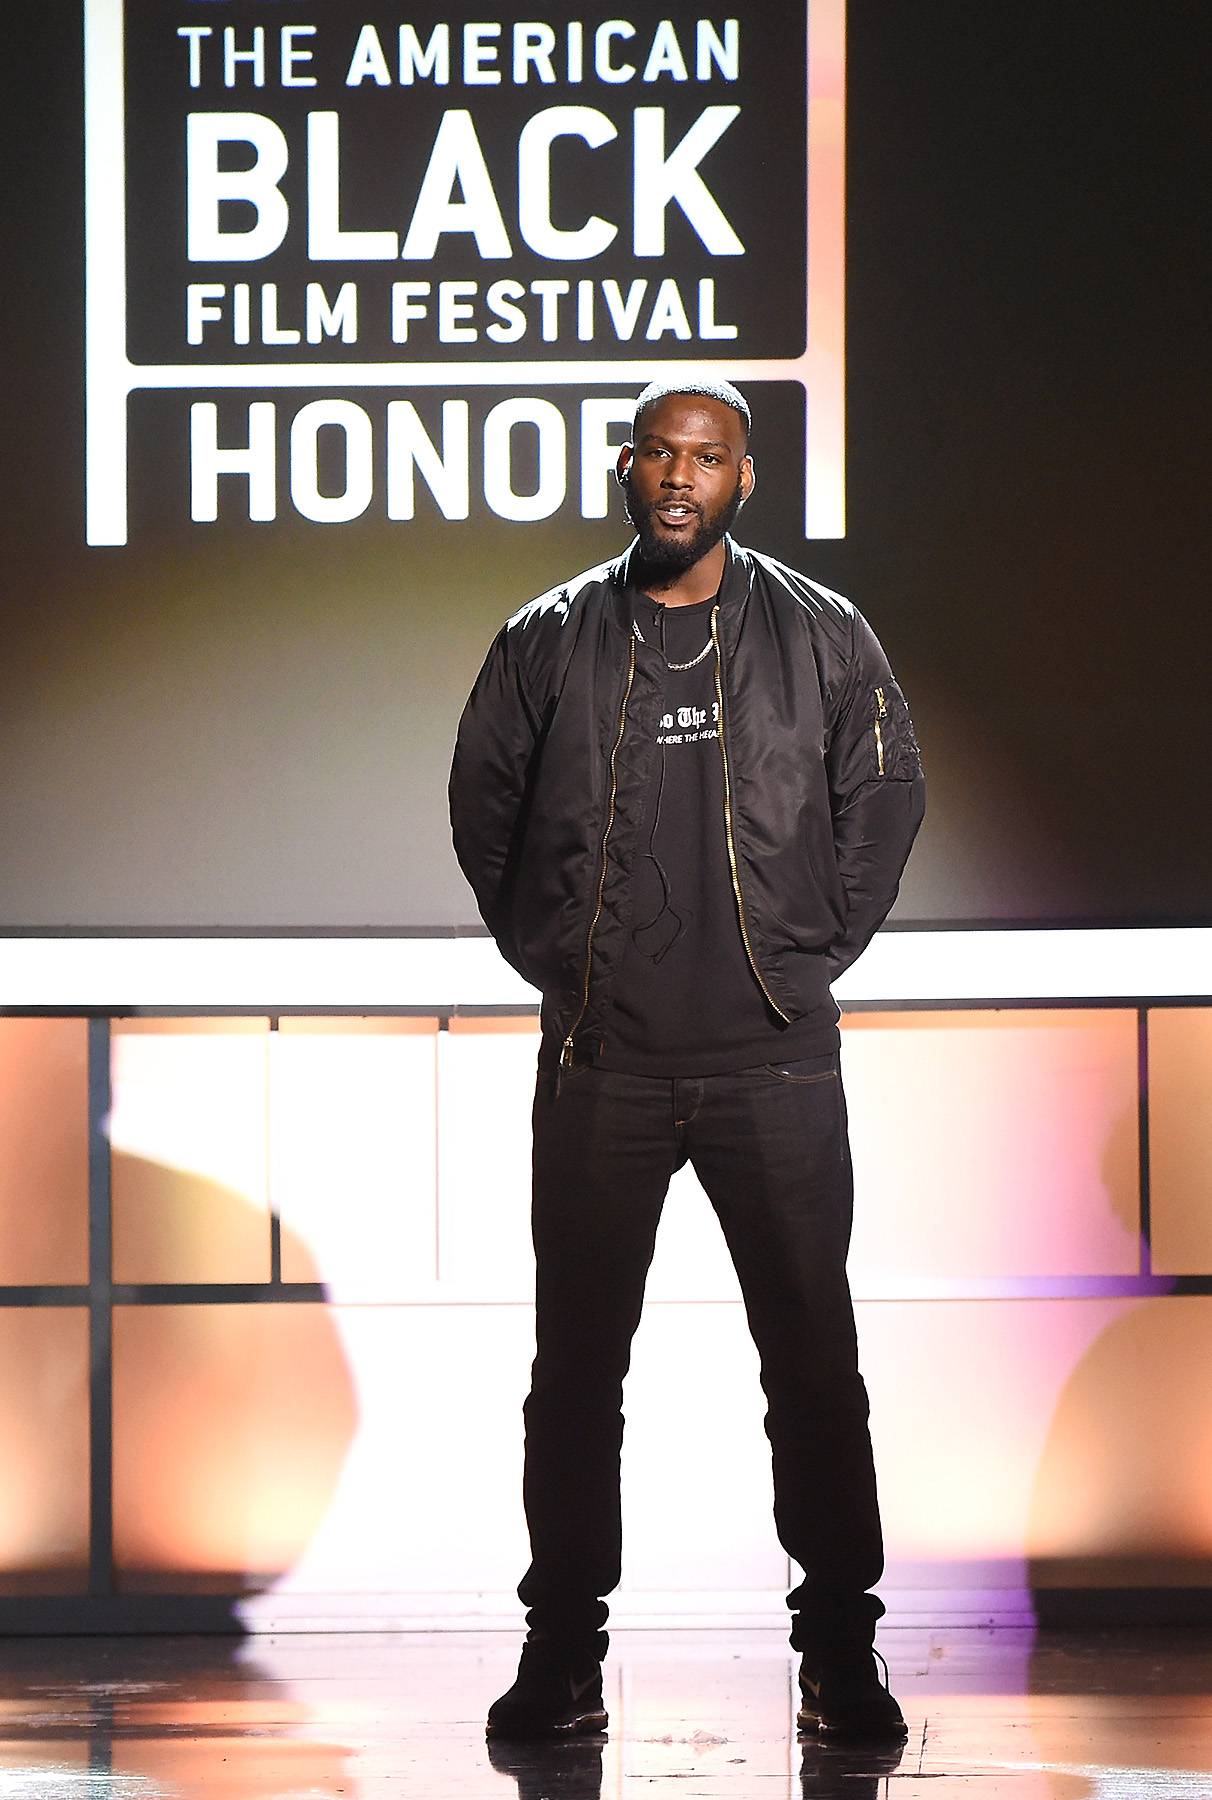 He Is a Film - Actor Kofi Siriboe doesn't have to do anything but stand there. Lucky for us, he'll be speaking and, more specifically, presenting an award at this year's ABFF Honors.&nbsp;(Photo: Kevin Winter/Getty Images for BET)